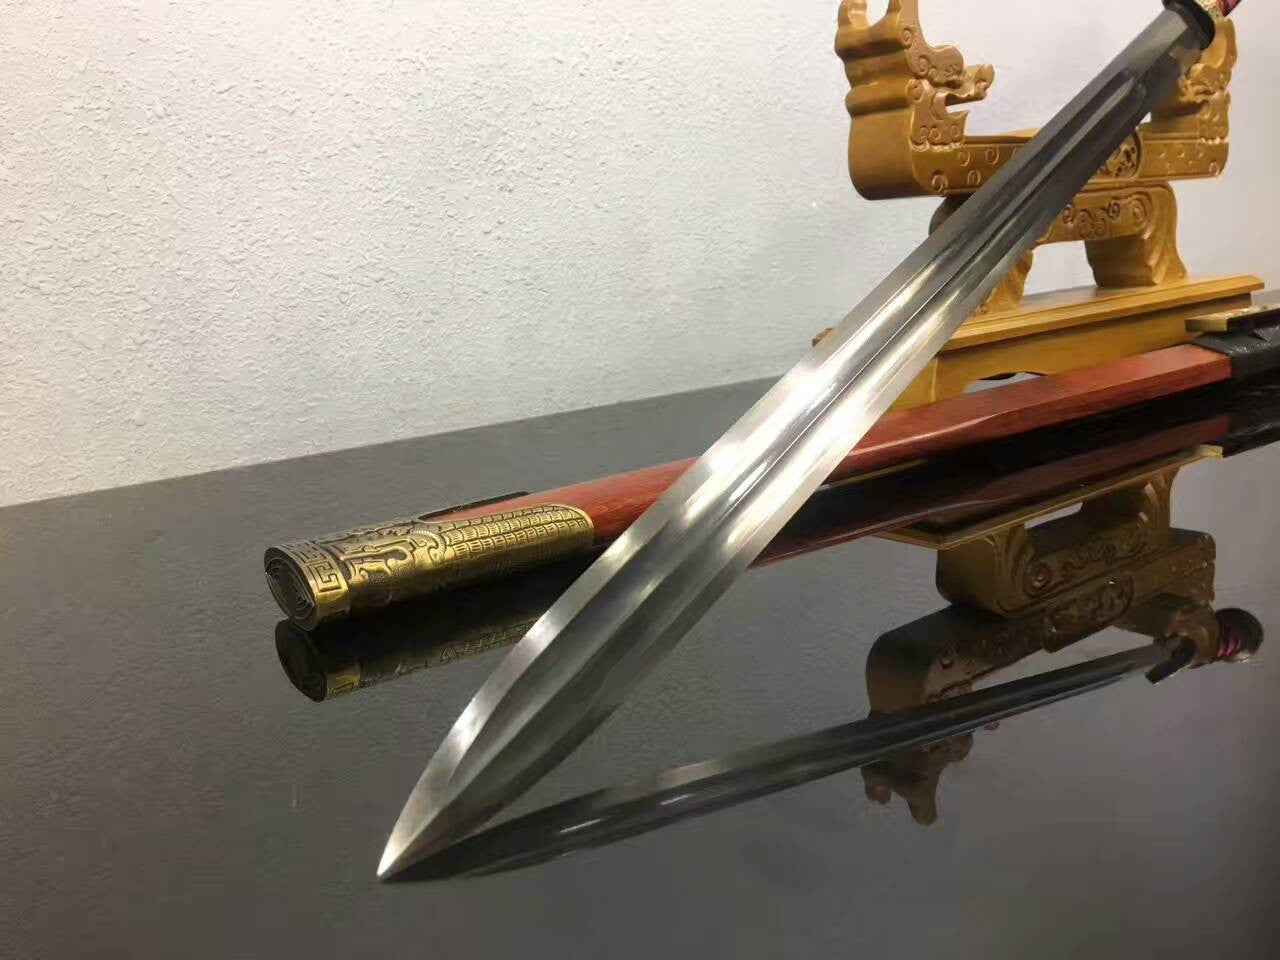 Chinese sword,Han jian(Folding steel blade,Redwood scabbard,Alloy fitted)Length 41" - Chinese sword shop